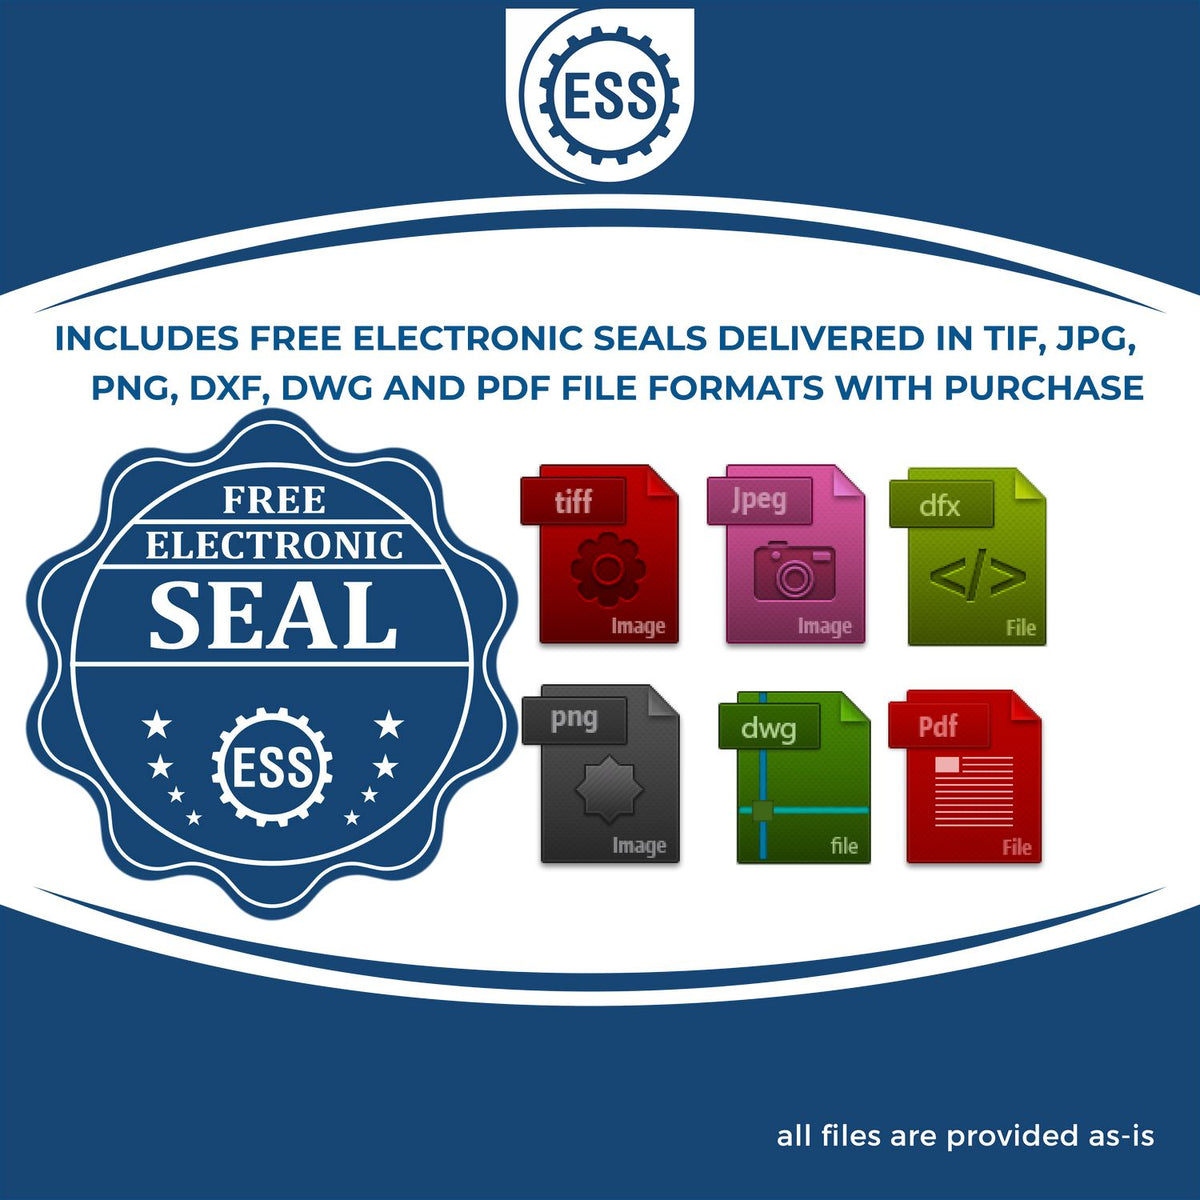 An infographic for the free electronic seal for the MaxLight Premium Pre-Inked North Dakota Rectangular Notarial Stamp illustrating the different file type icons such as DXF, DWG, TIF, JPG and PNG.